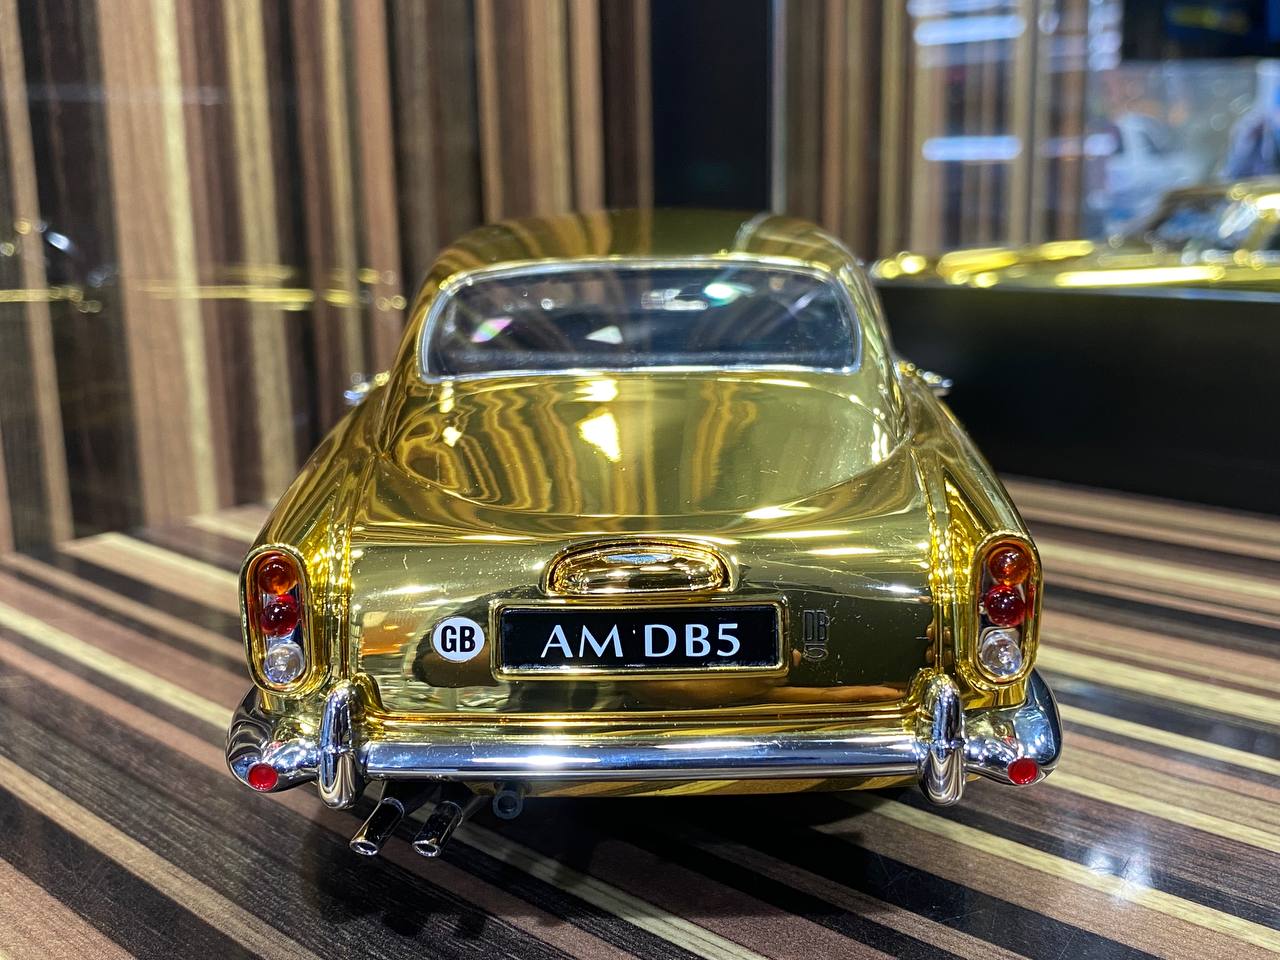 1/18 Aston Martin DB5 - All Opening Diecast (Gold) by XiaoGuang Model